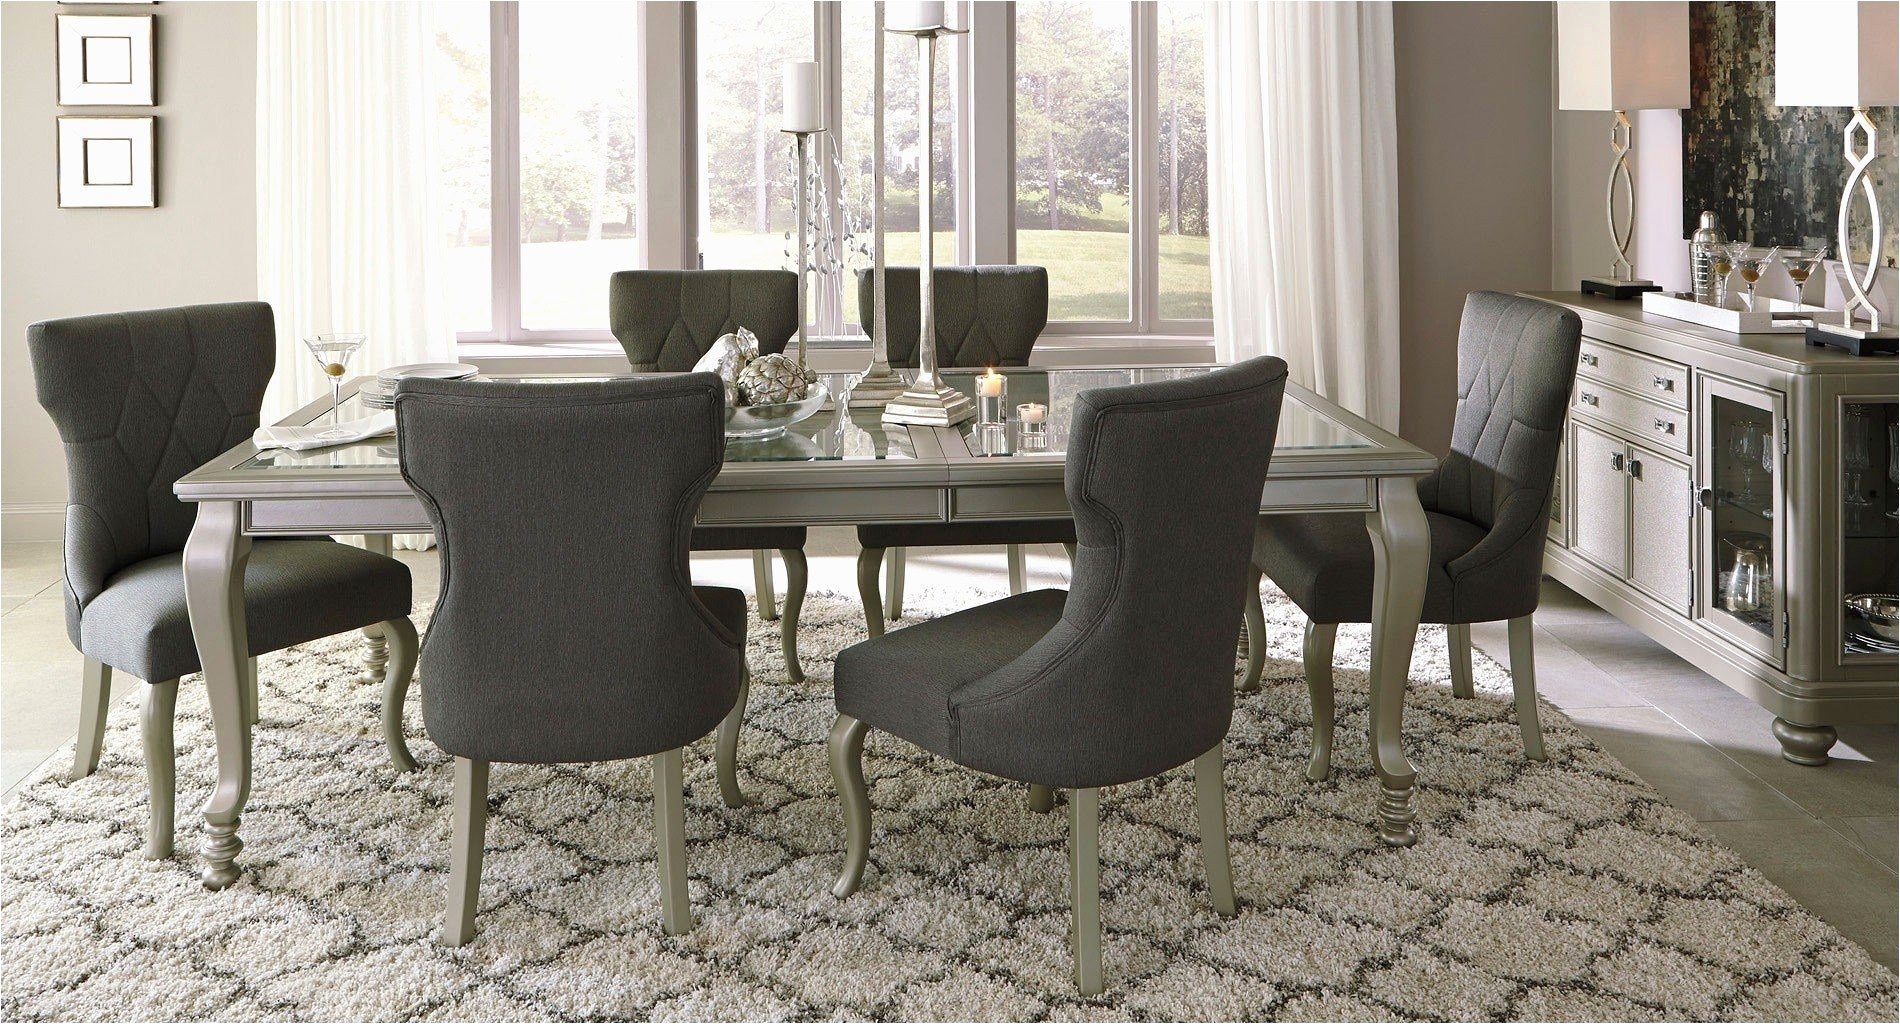 dining room sets for sale brilliant shaker chairs 0d archives modern house ideas and furniture set